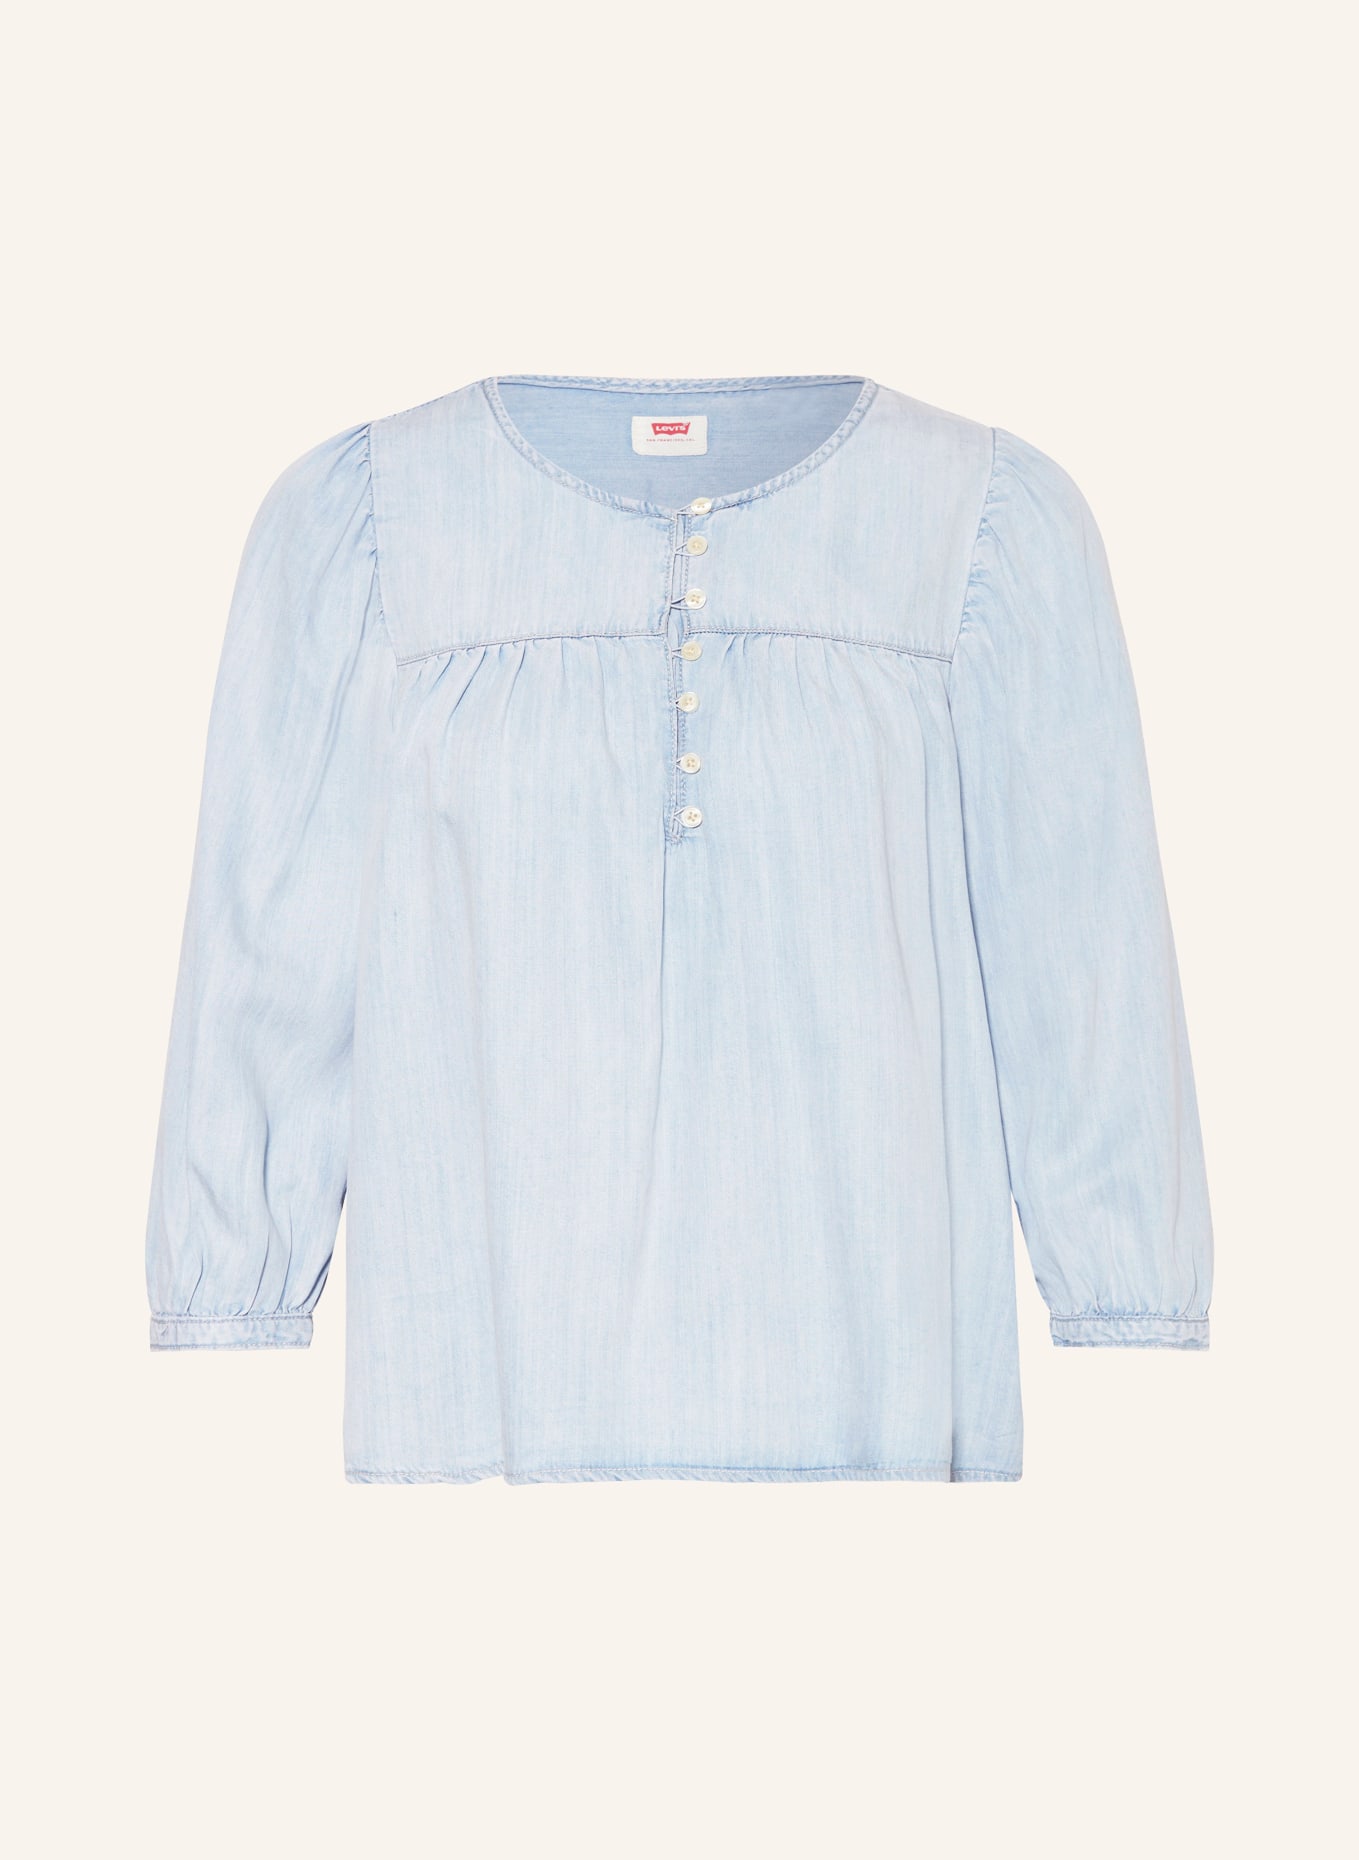 Levi's® Shirt blouse HALSEY in denim look with 3/4 sleeve, Color: LIGHT BLUE (Image 1)